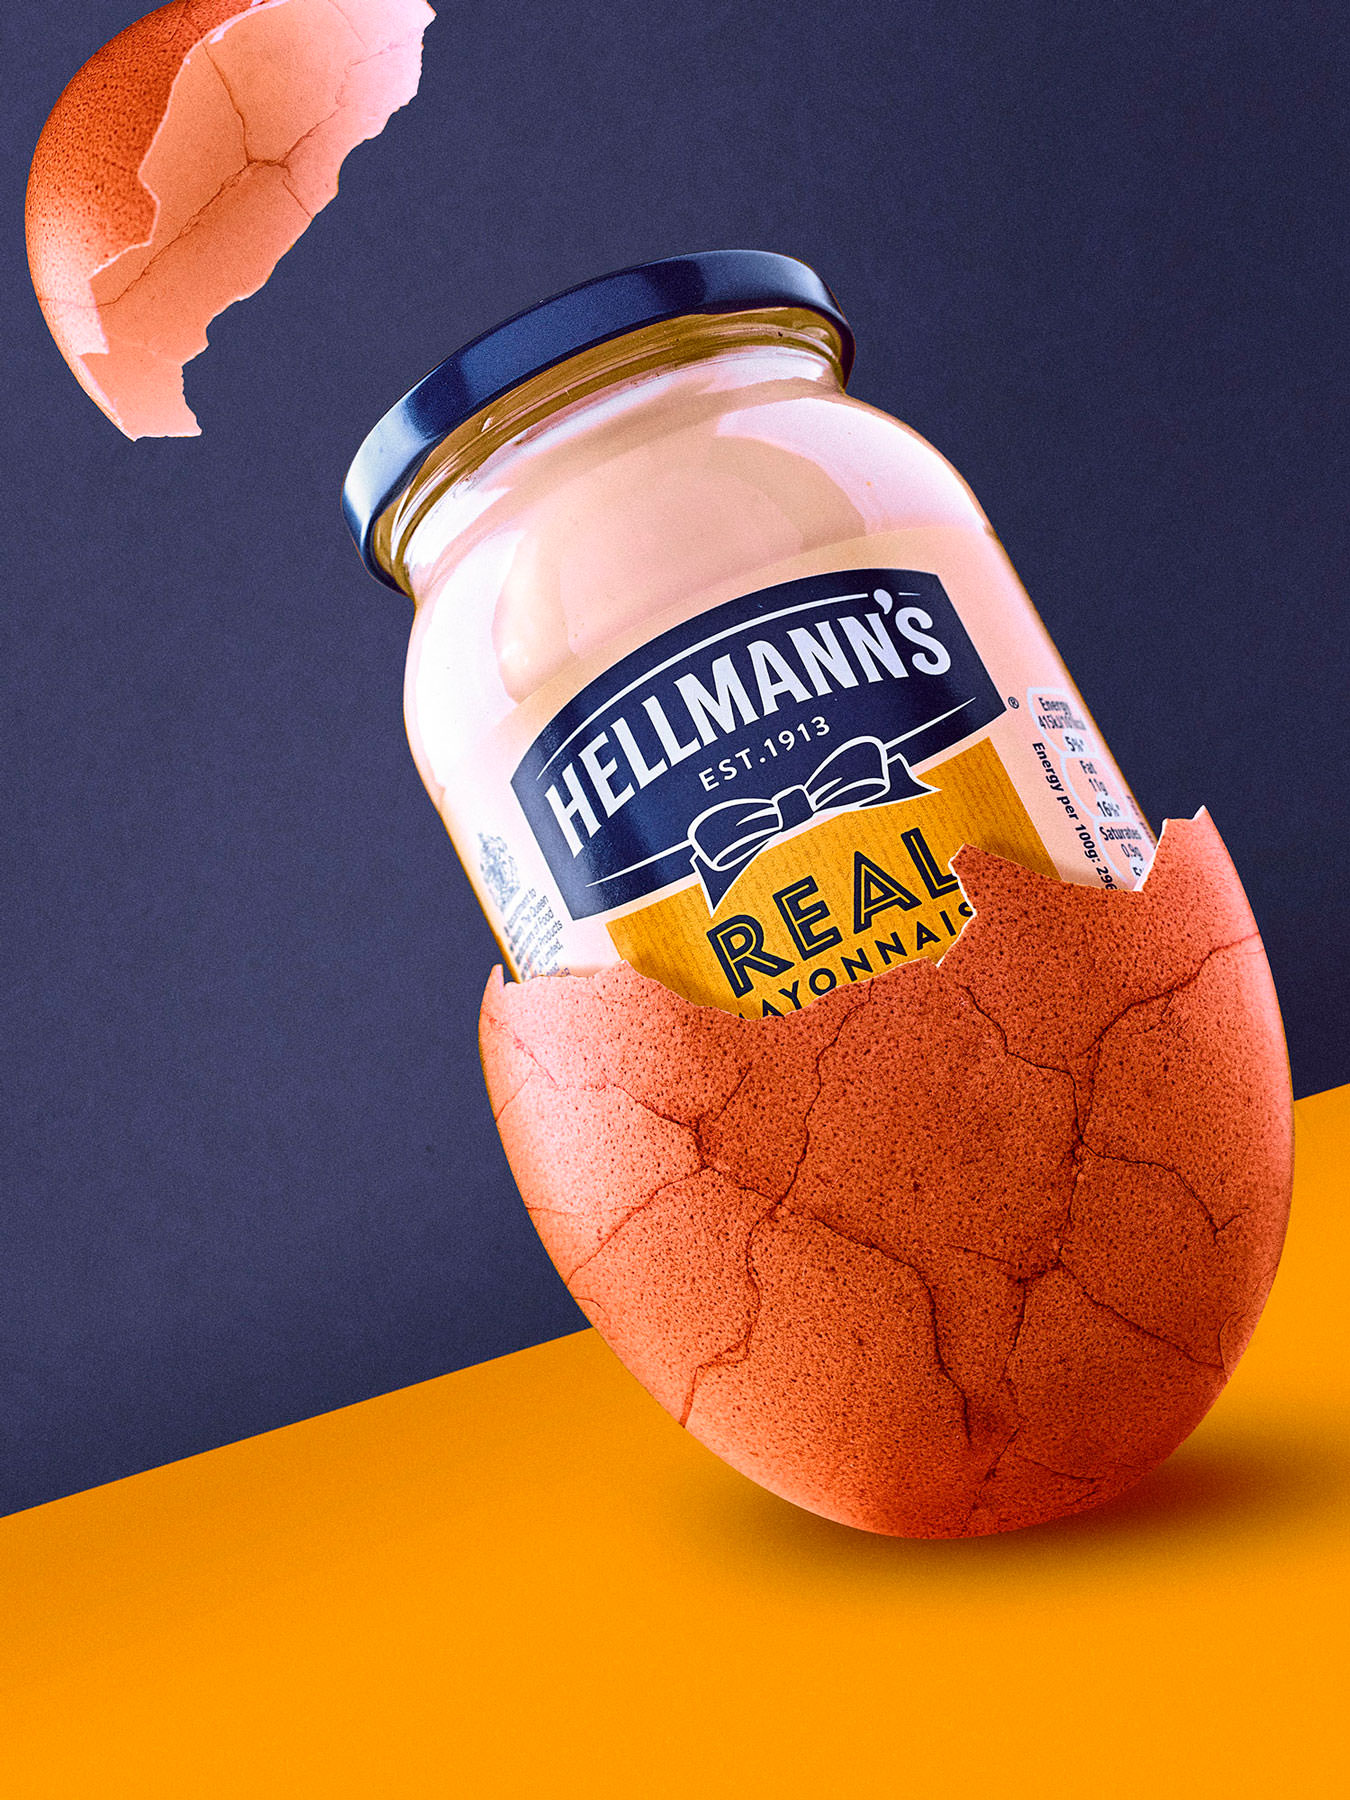 Jar of Hellmanns Mayonnaise  cracking out of an eggshell - London Food & Drinks Photographer